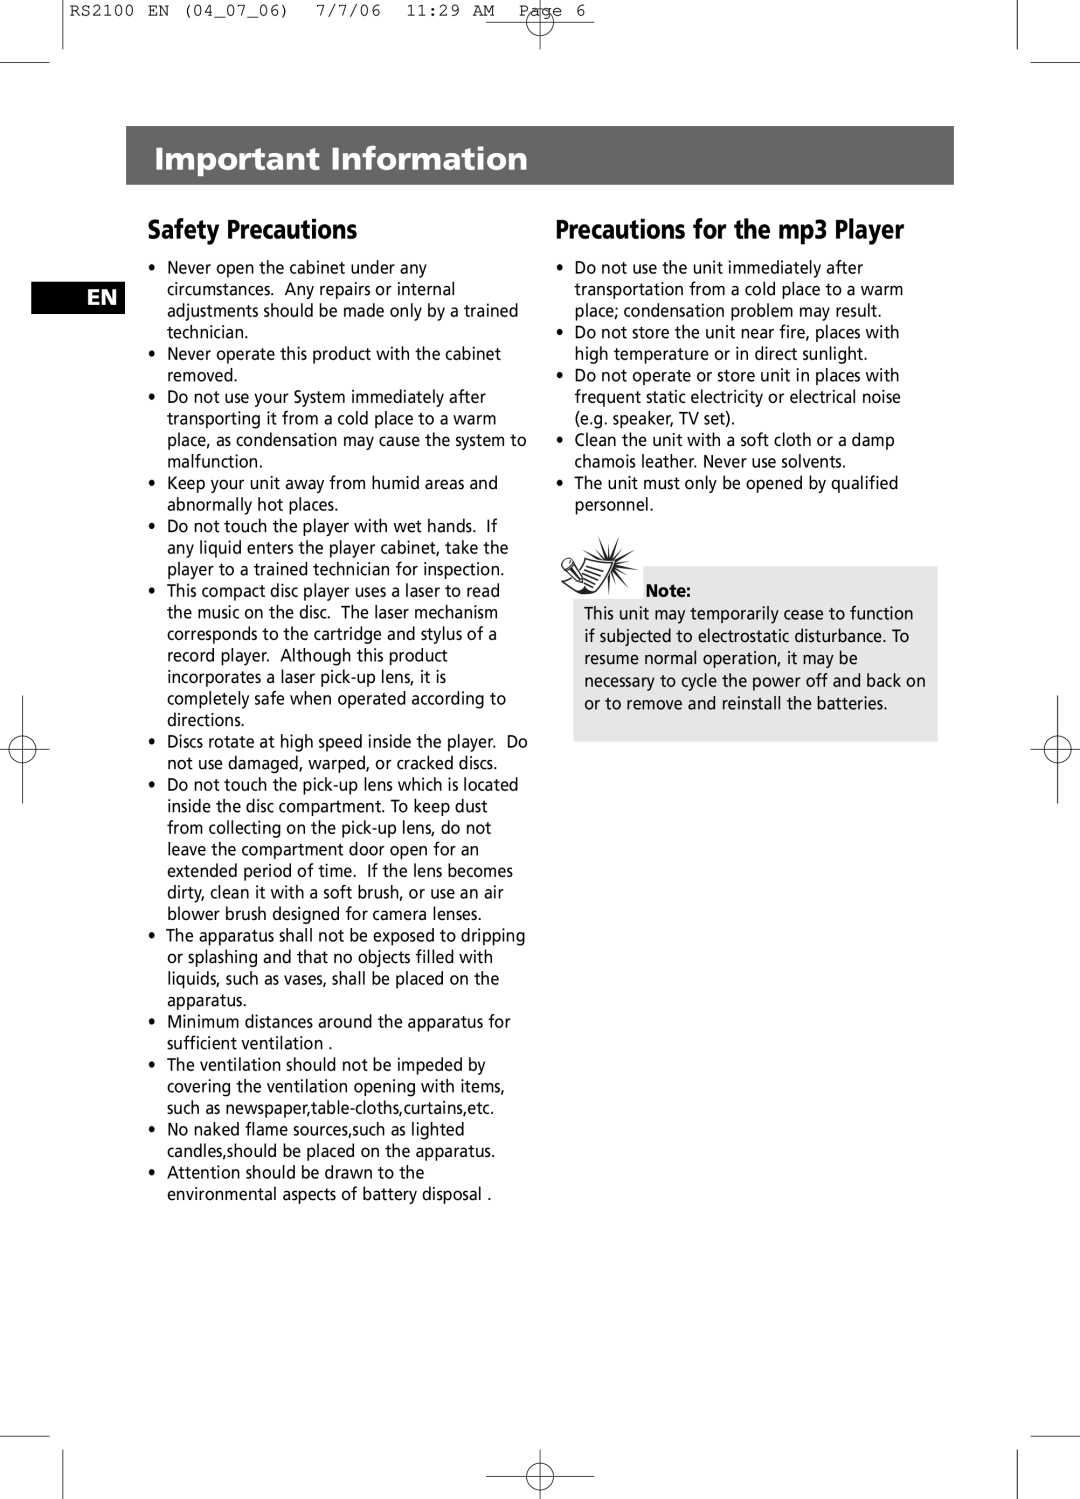 RCA RS2100 user manual Important Information, Safety Precautions, Precautions for the mp3 Player 